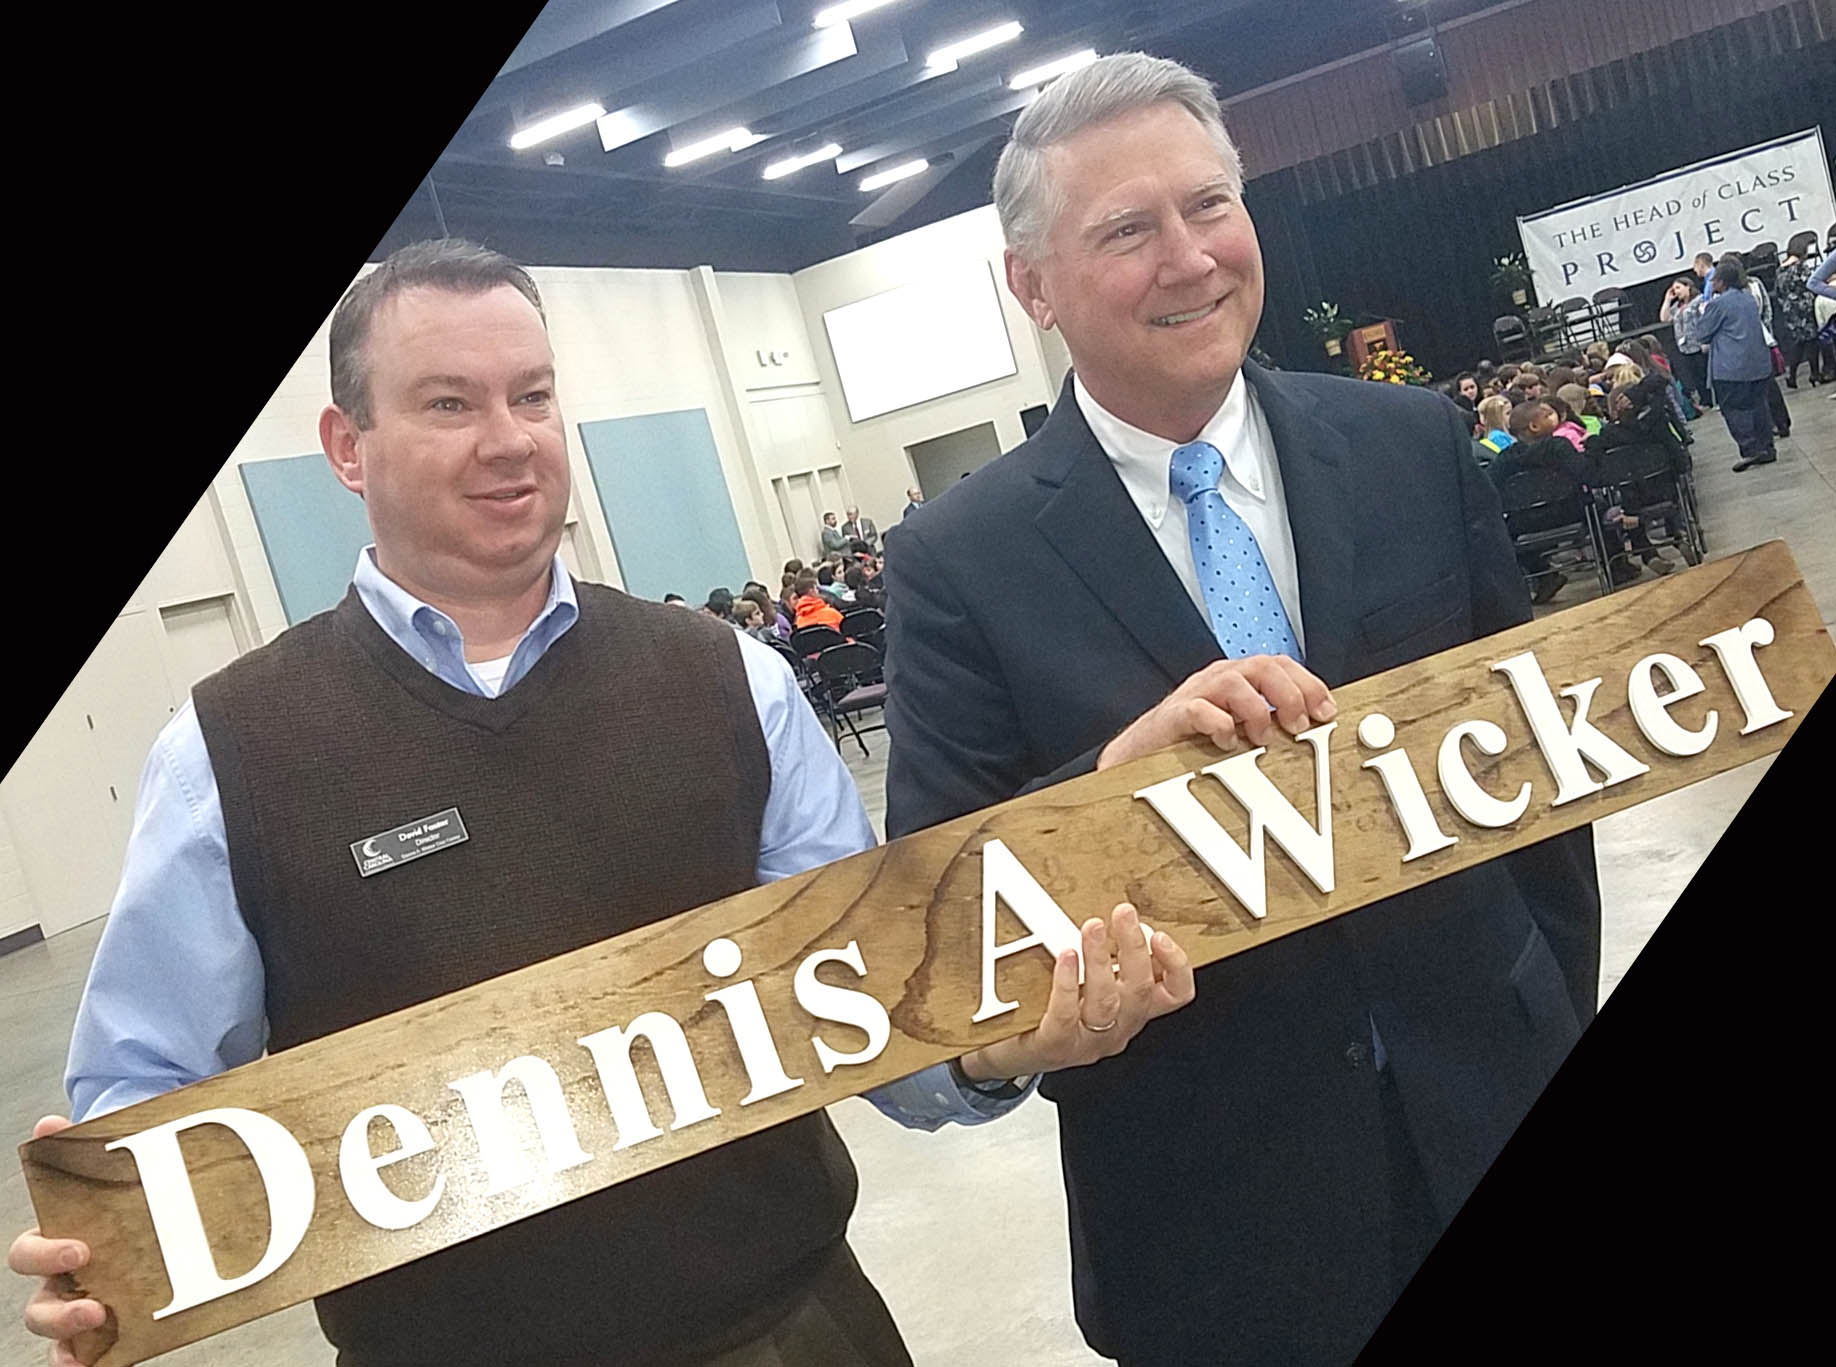 Click to enlarge,  The staff of the Dennis A. Wicker Civic and Conference Center in Sanford recently presented former N.C. Lt. Gov. Dennis A. Wicker (right) with the original mounted letters from the original road entry sign of the Dennis A. Wicker Civic Center, located at the corner of Kelly Drive and Nash Street in Sanford. At left is David Foster, who is Director of the Civic Center. Rebranded in 2018, the Dennis A. Wicker Civic and Conference Center new lettering will appear on the entry sign. The staff made the presentation as a token of appreciation for Lt. Gov. Wicker's support.  